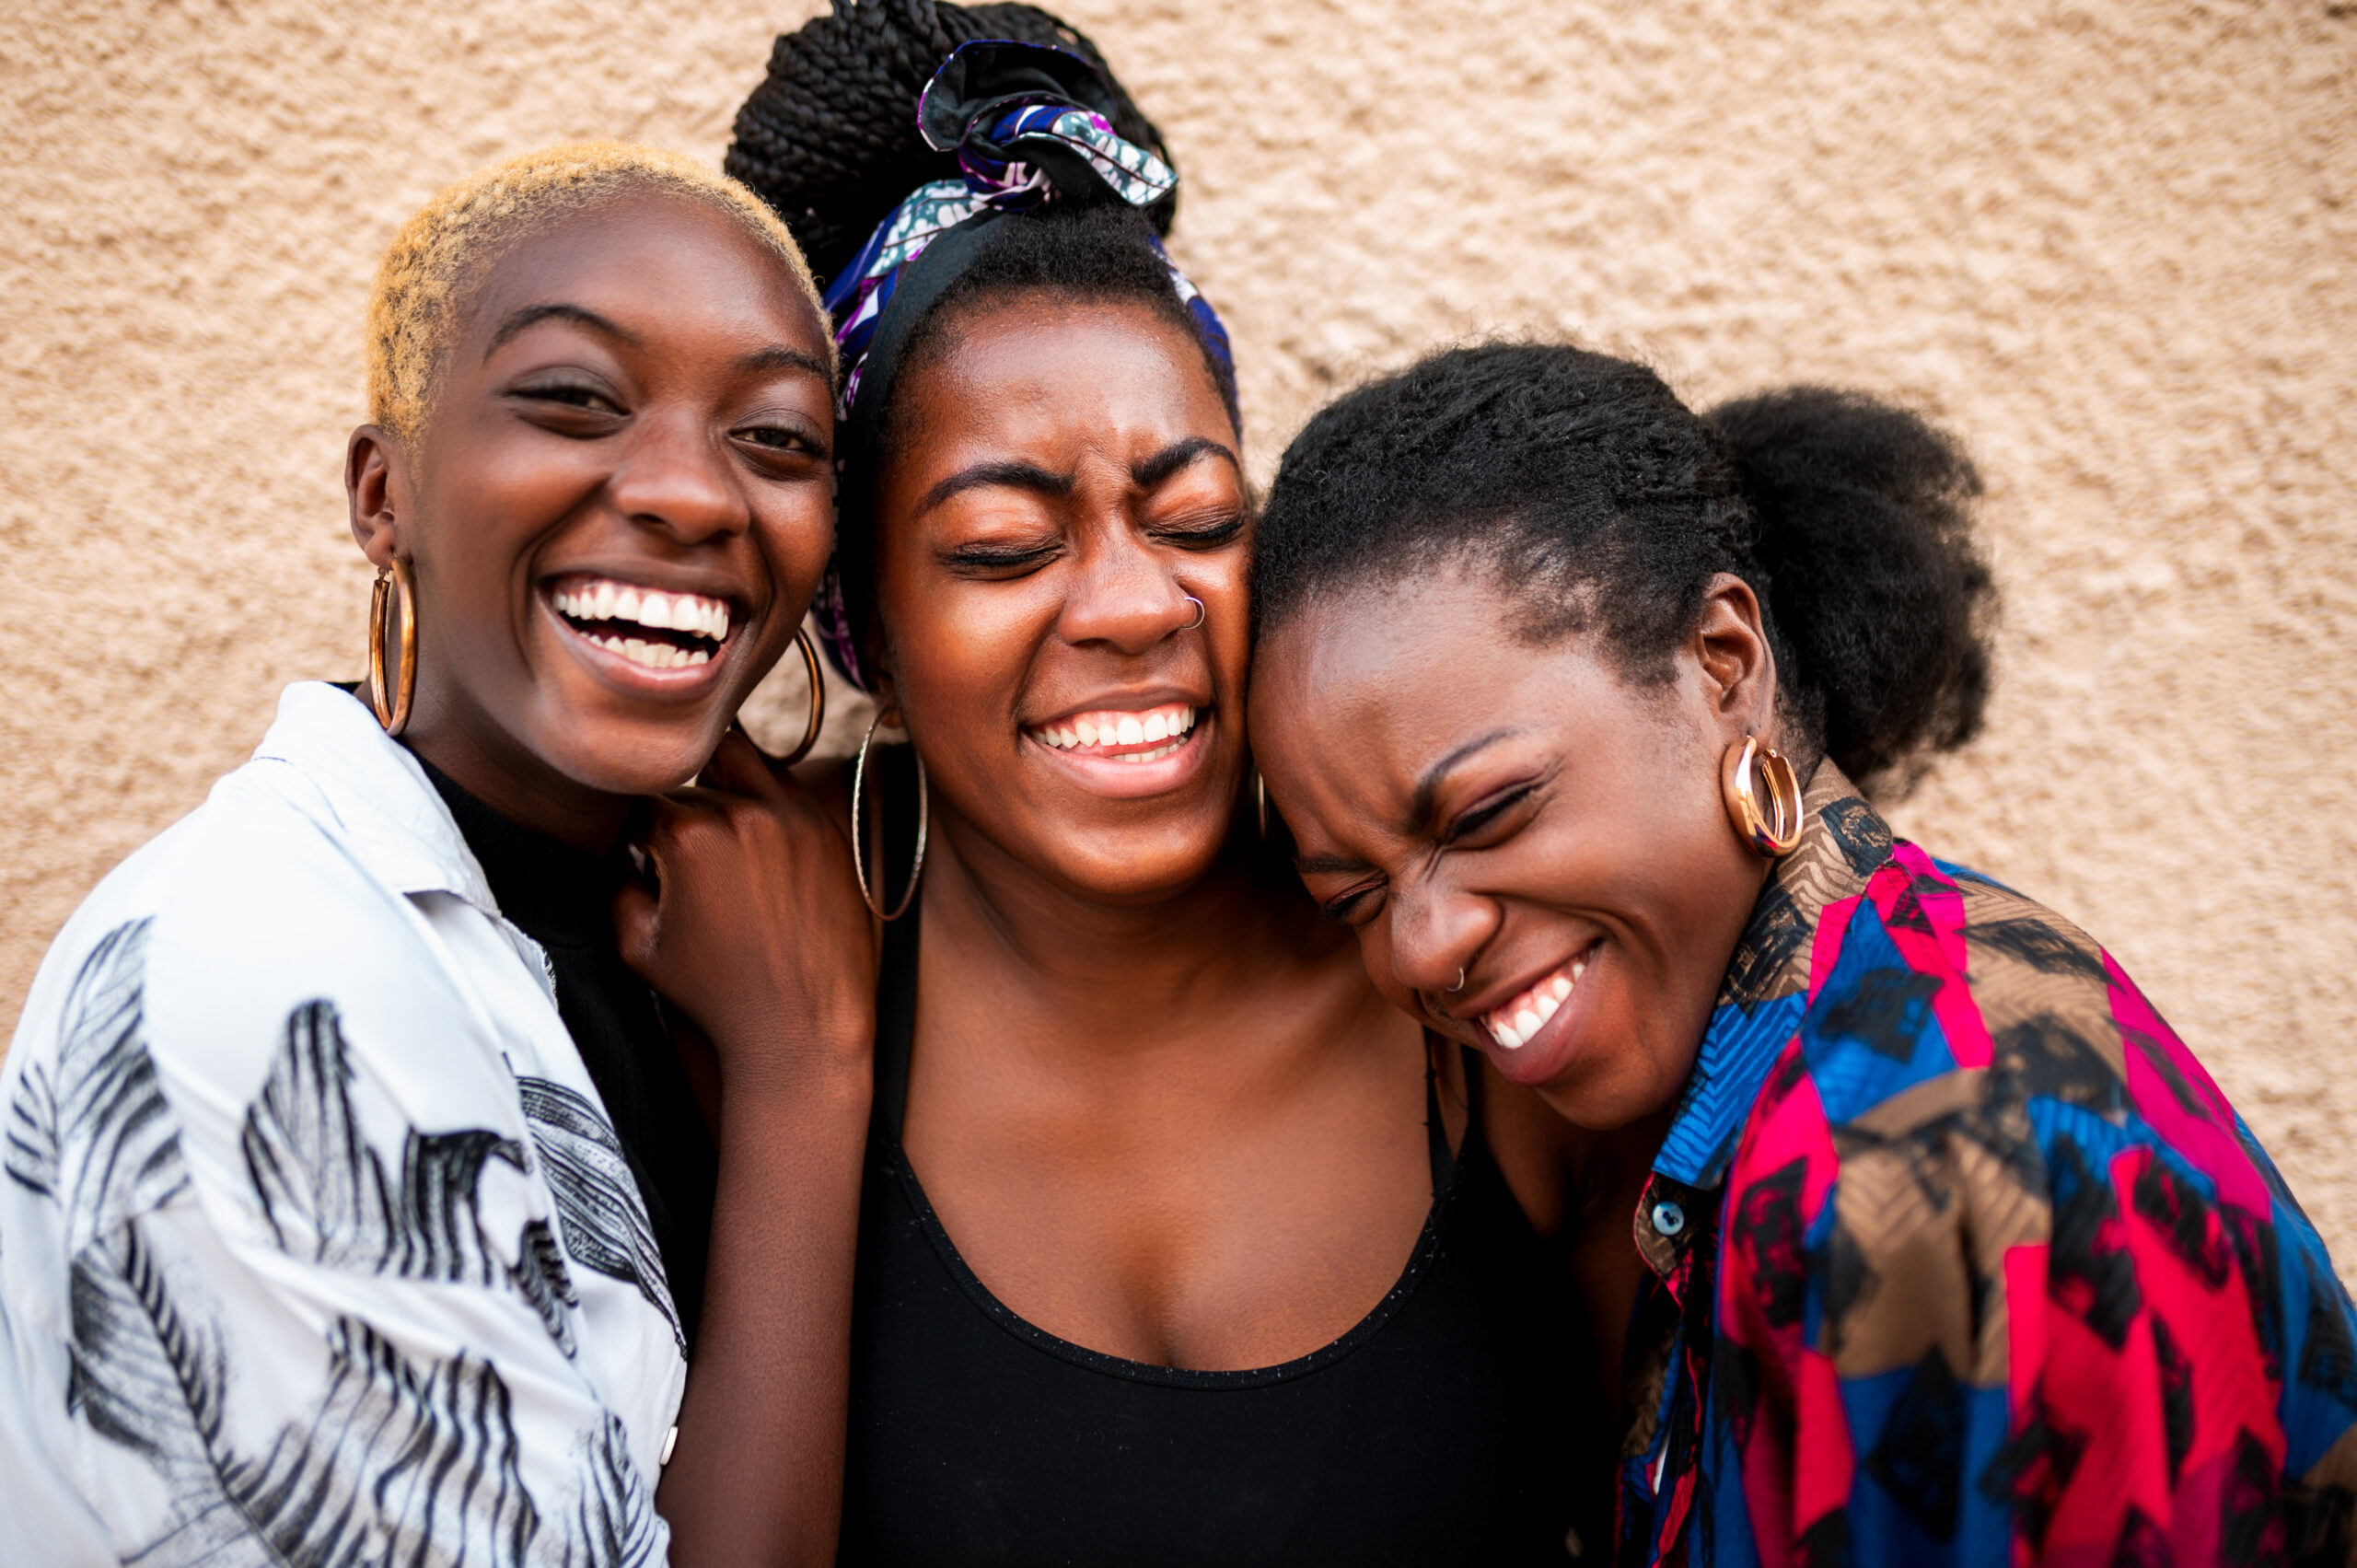 Join This Study to Understand Why Black Women Have the Highest Rates of Cancer